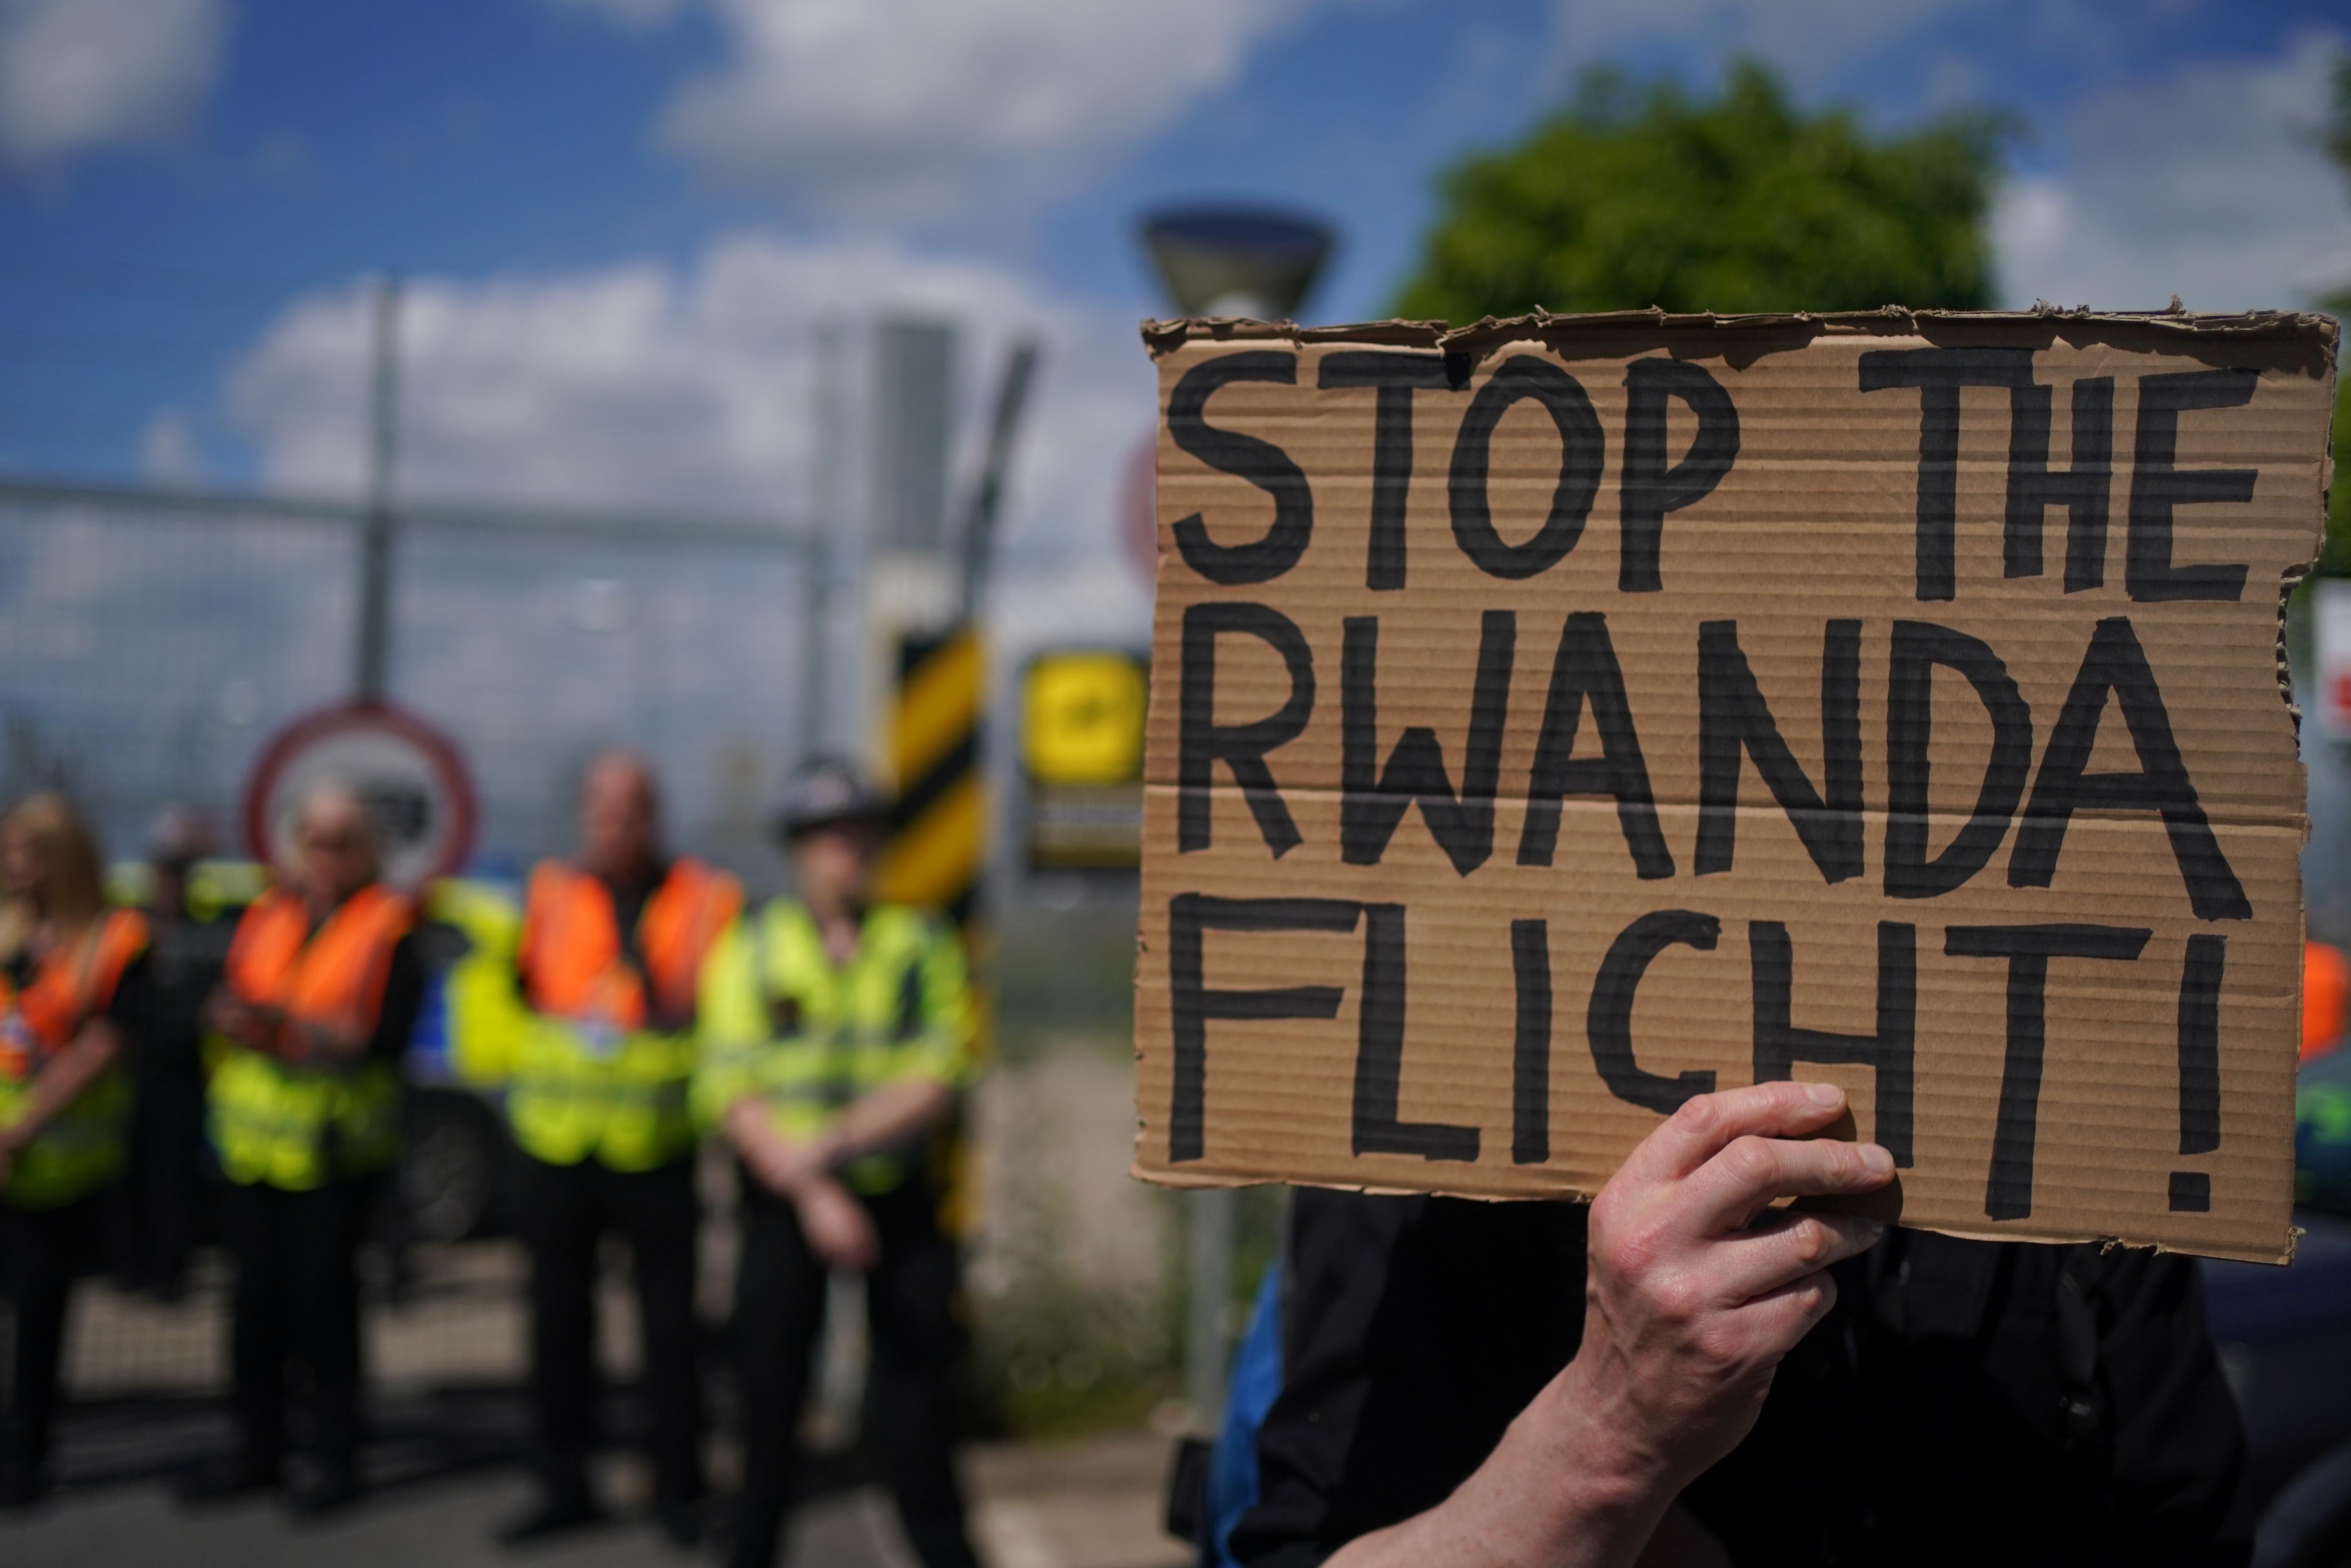 Demonstrators at a removal centre at Gatwick protest against plans to send migrants to Rwanda (Victoria Jones/PA)